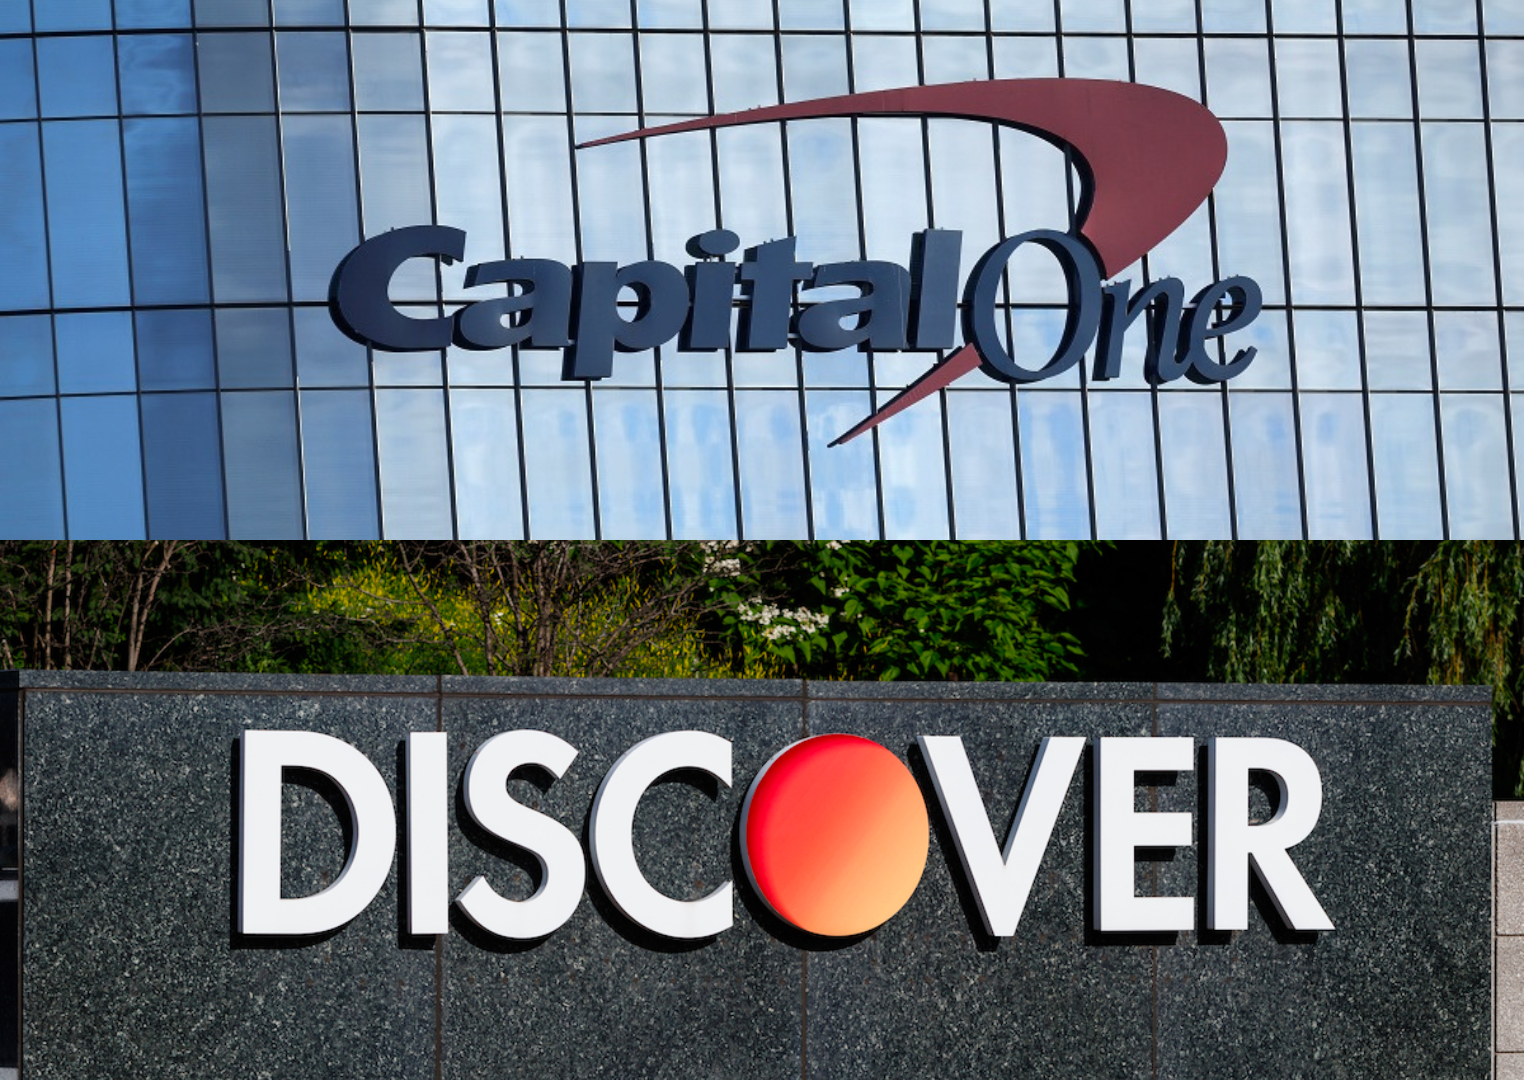 Capital One’s Bold Move: Acquiring Discover to Reinvent the Payments Landscape